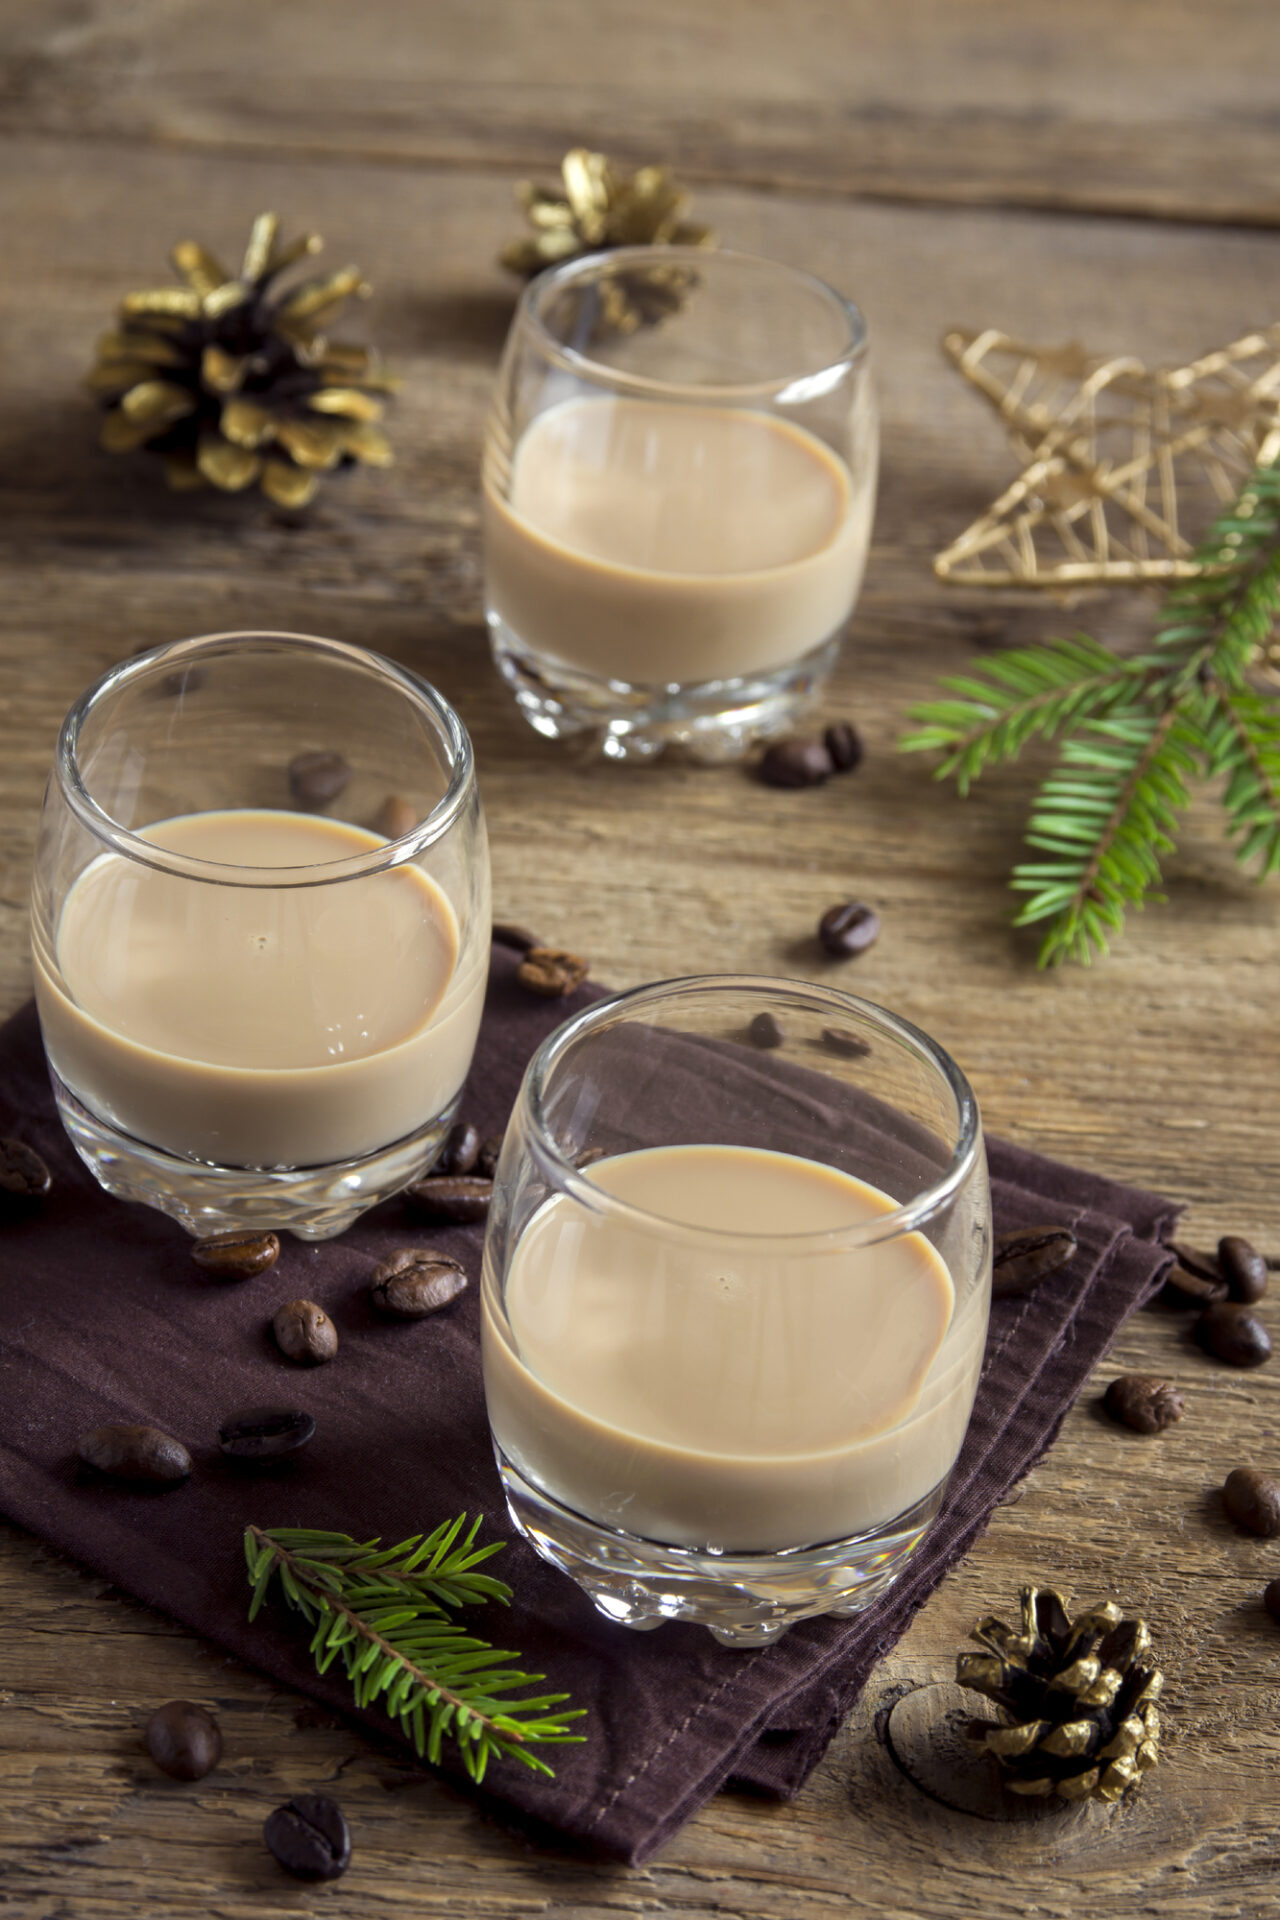 Glasses of homemade Baileys on a wooden counter.